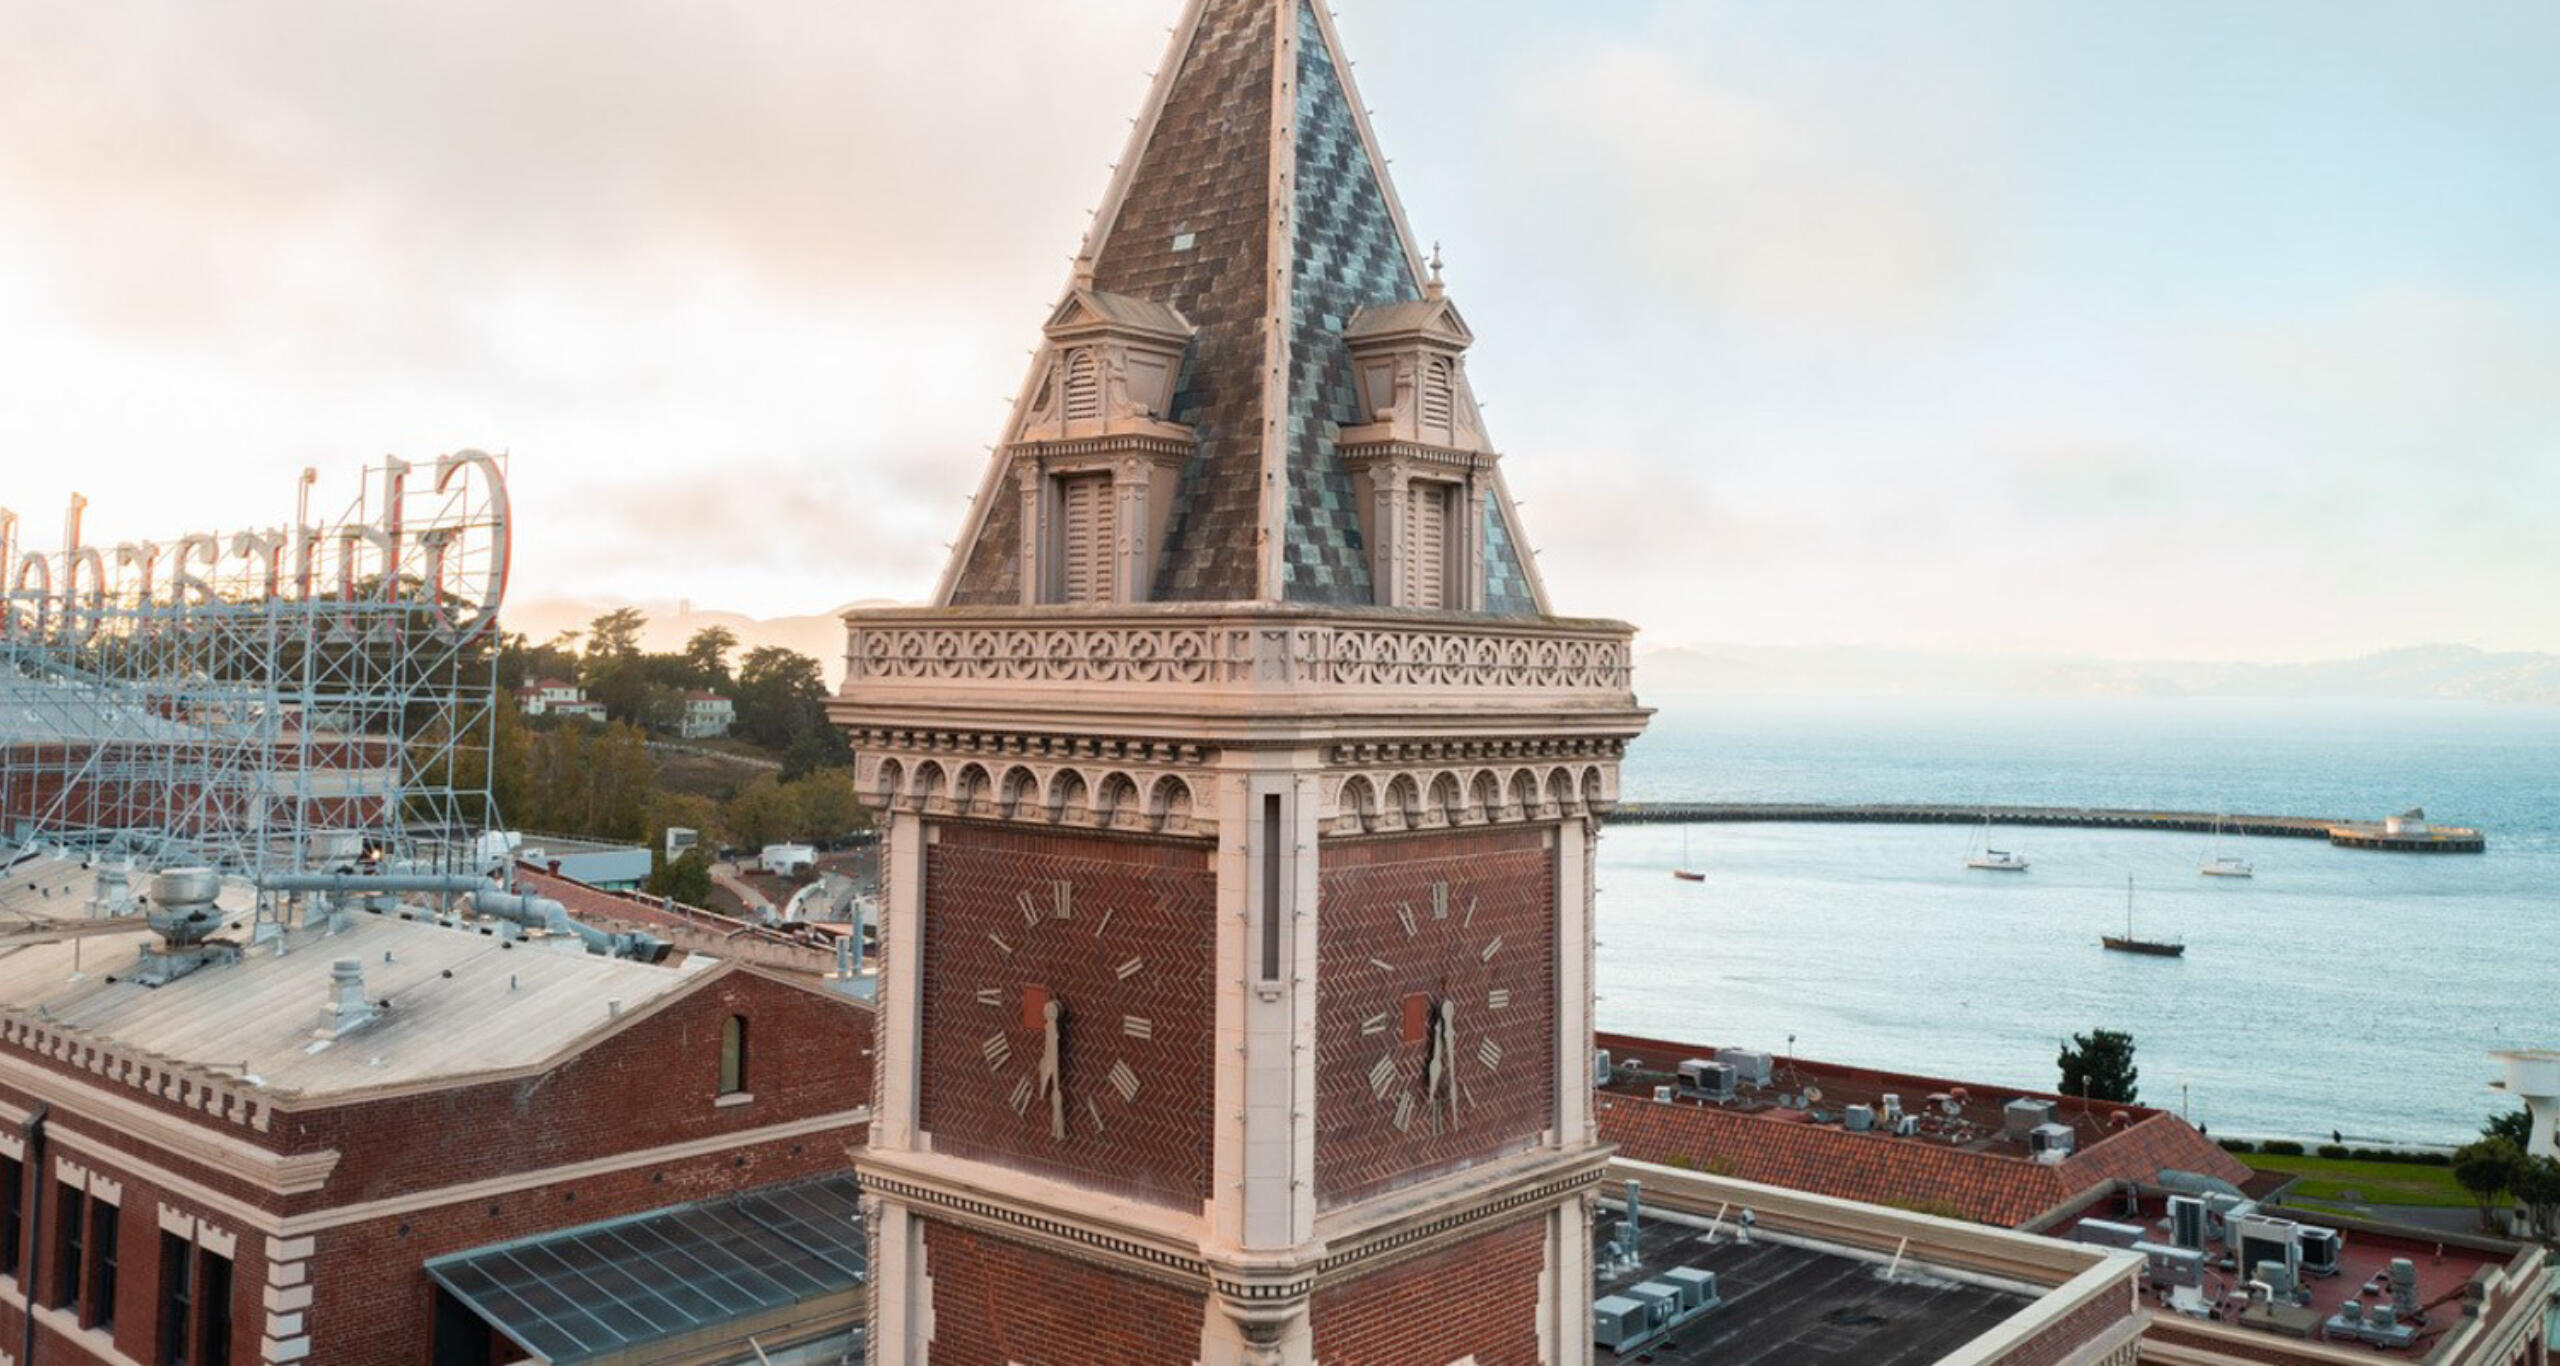 Ghirardelli Square's clock tower, with view of San Francisco Bay in background